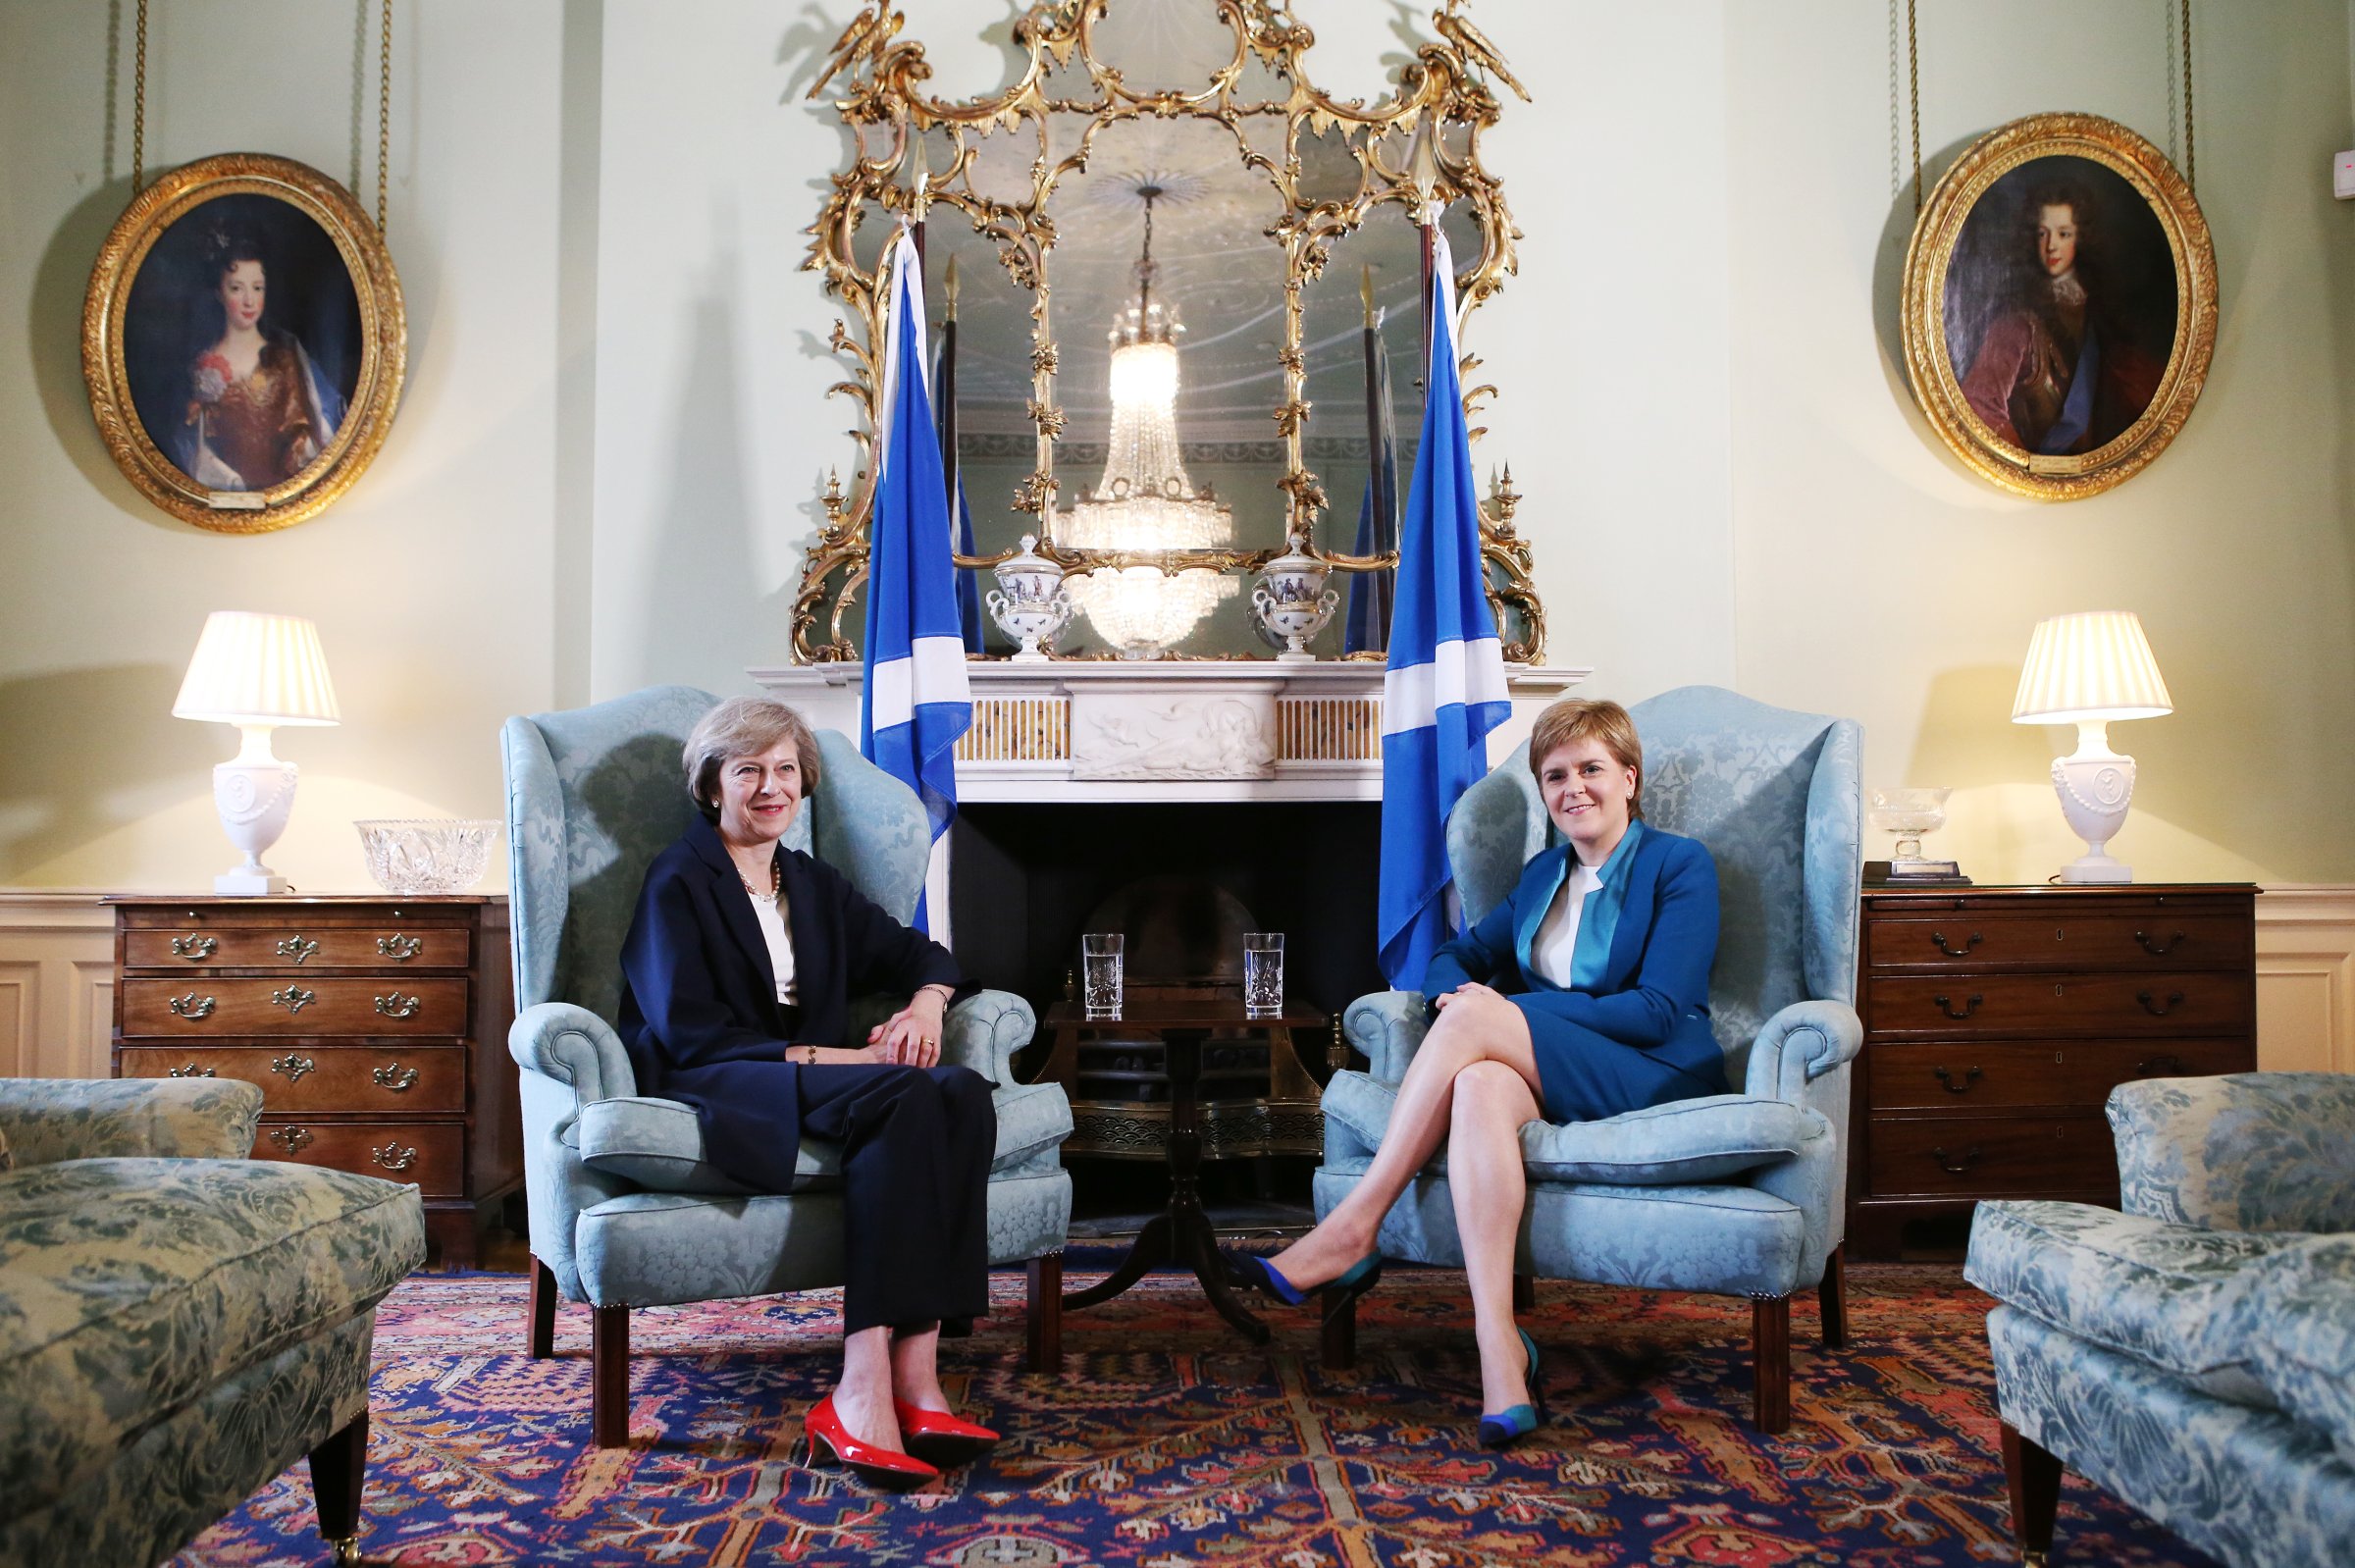 British Prime Minister Theresa May (L) meets with First Minister Nicola Sturgeon at Bute House on July 15, 2016 in Edinburgh, Scotland.